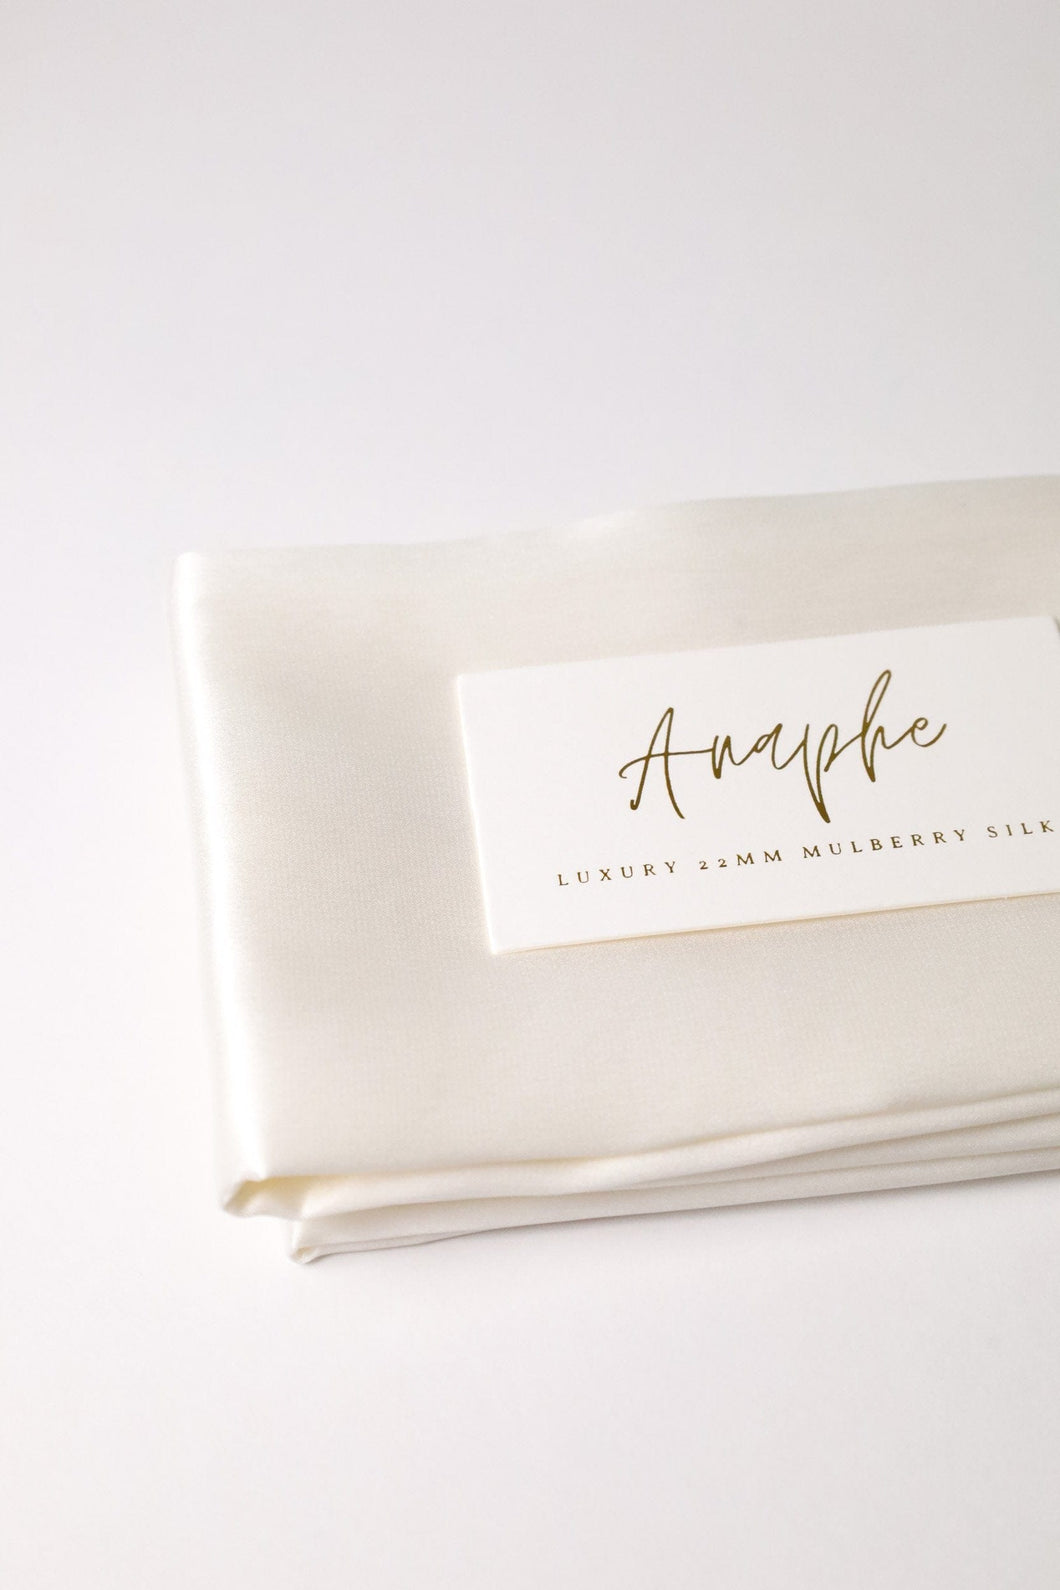 Anaphe Additions White Silk Pillowcase 22momme 6A